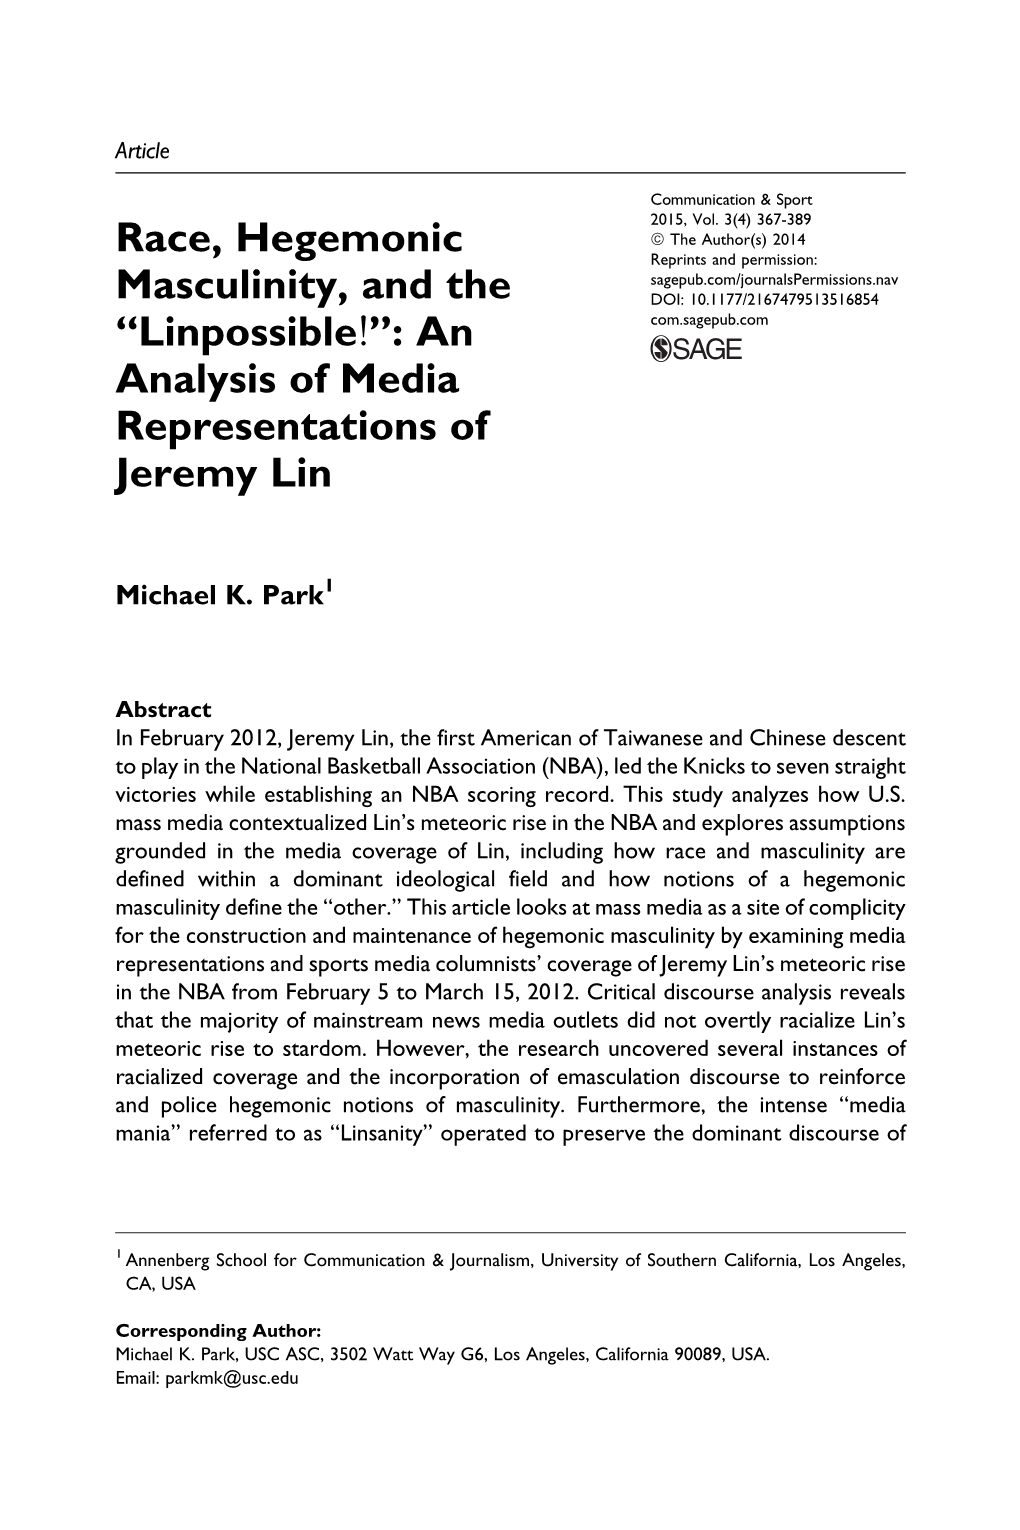 Race, Hegemonic Masculinity, and the ''Linpossible!'': an Analysis Of